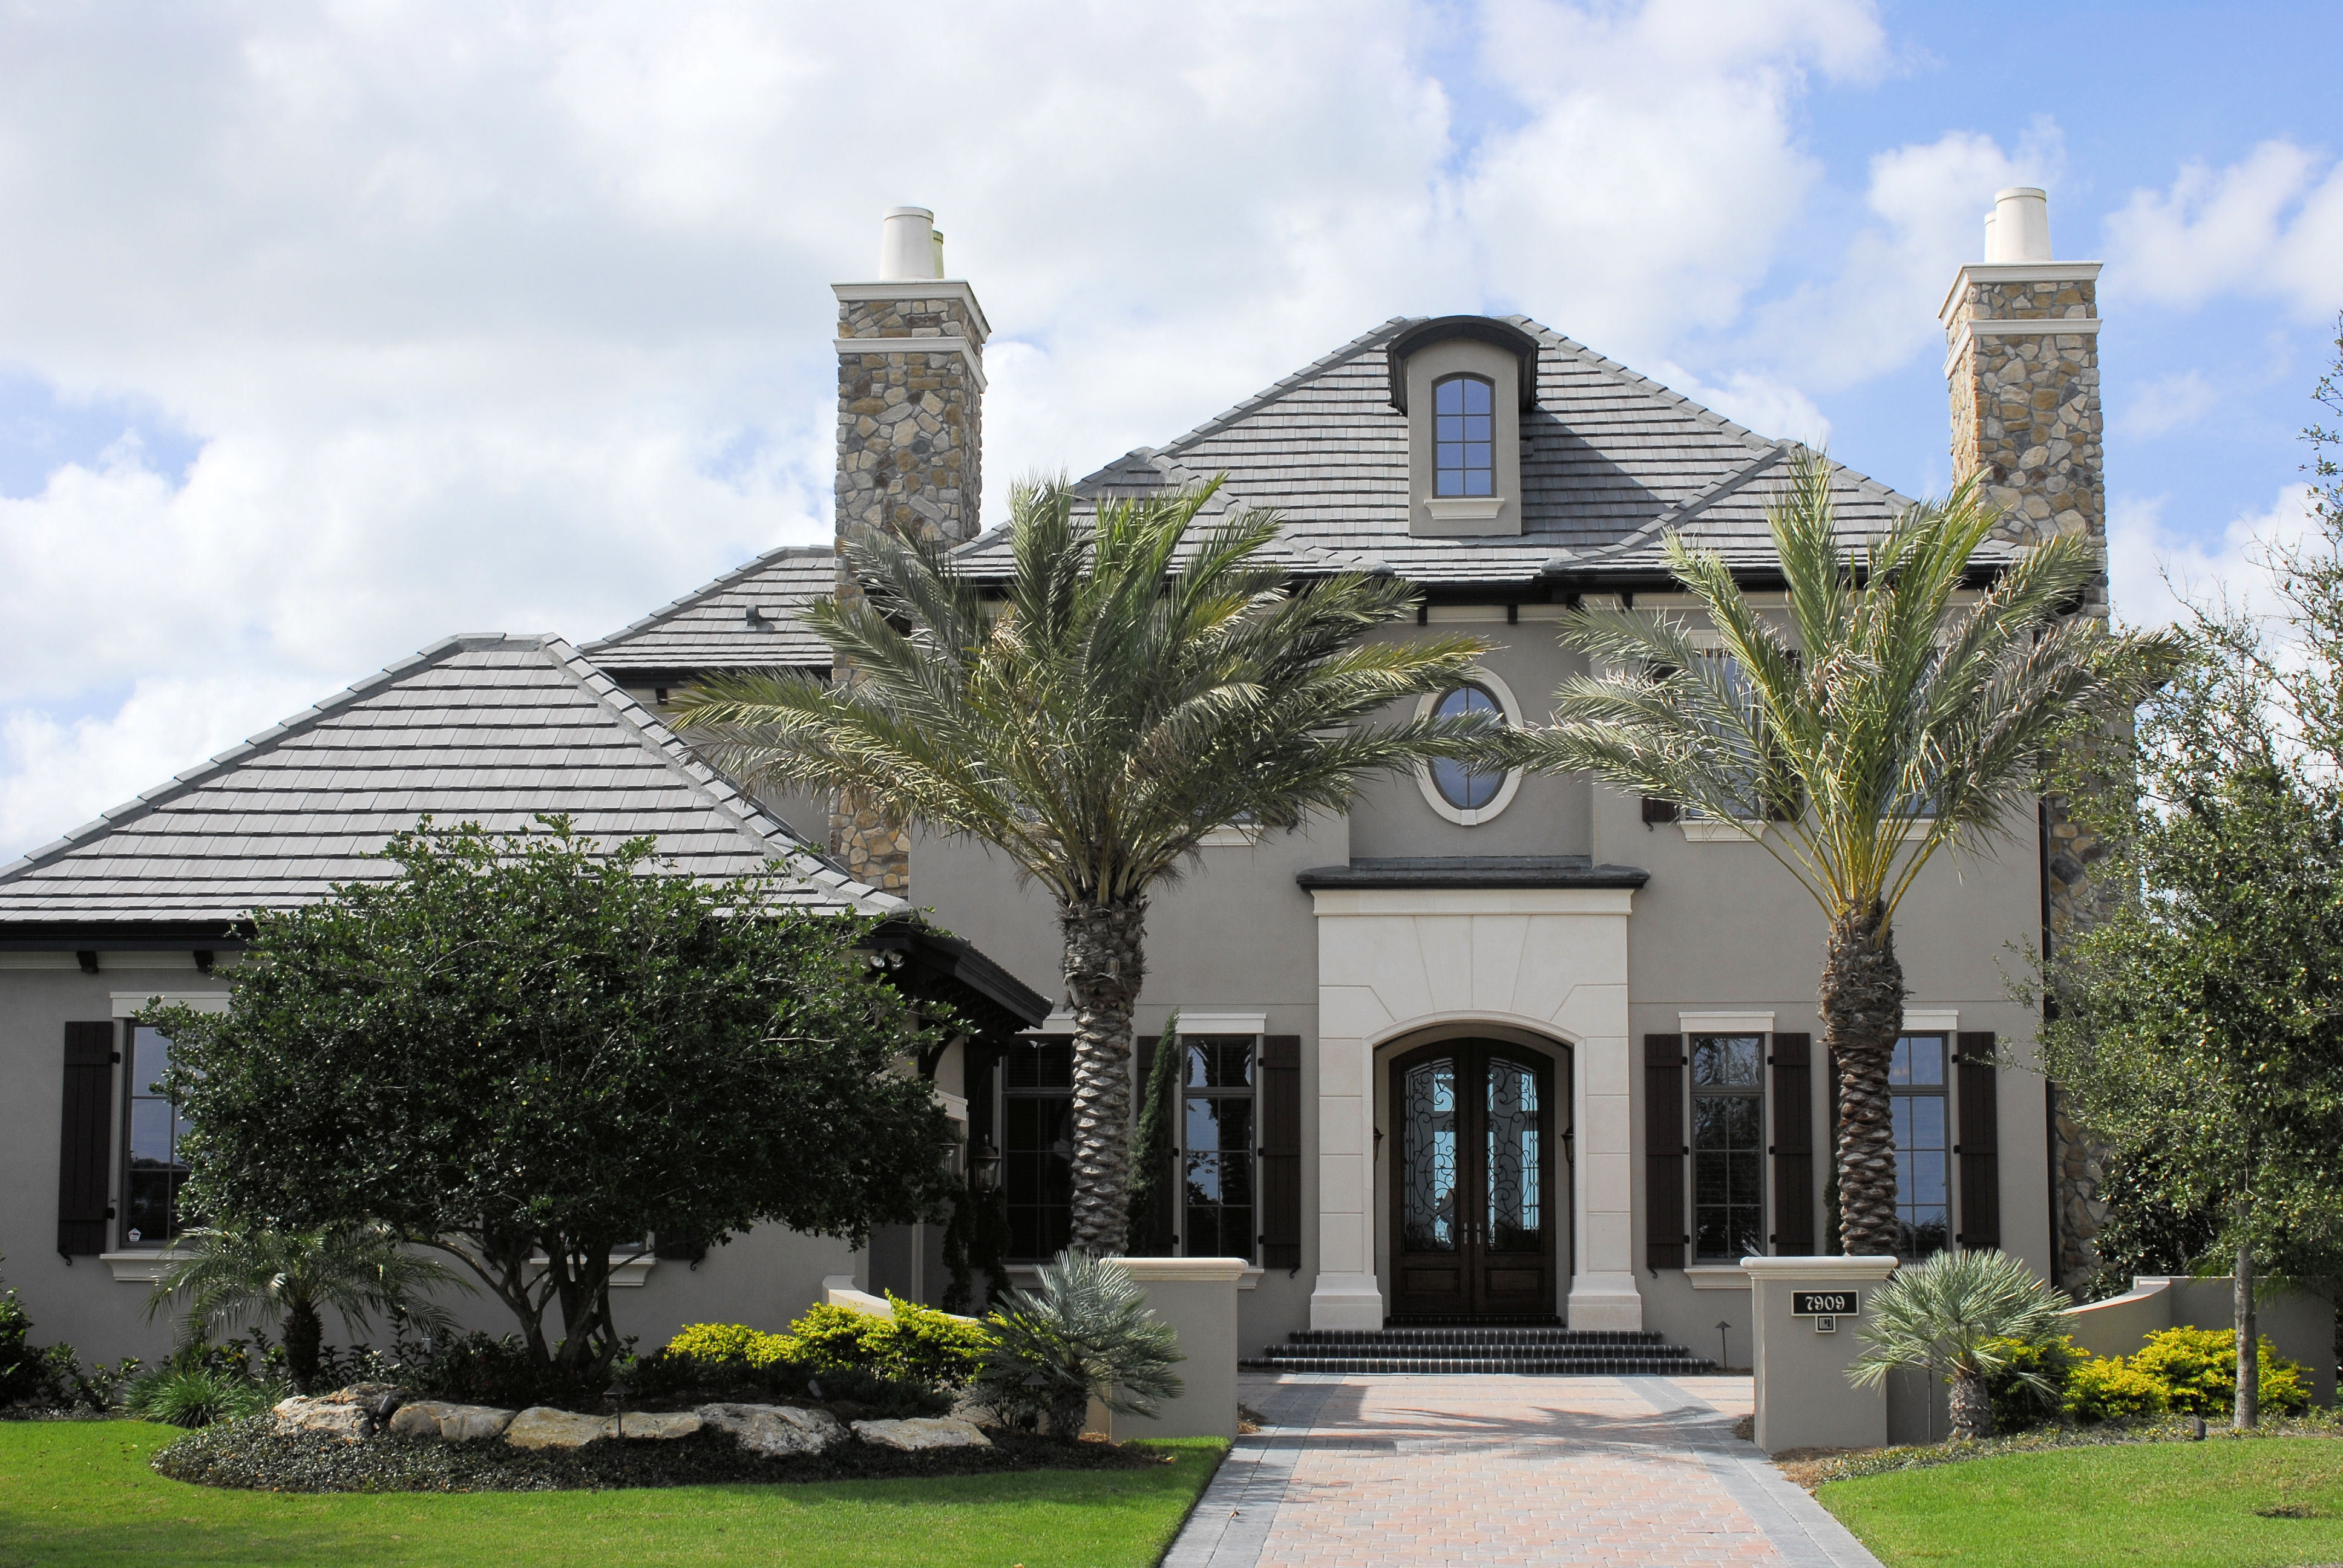 CertaPro Painters North Miami, FL are your Exterior painting experts